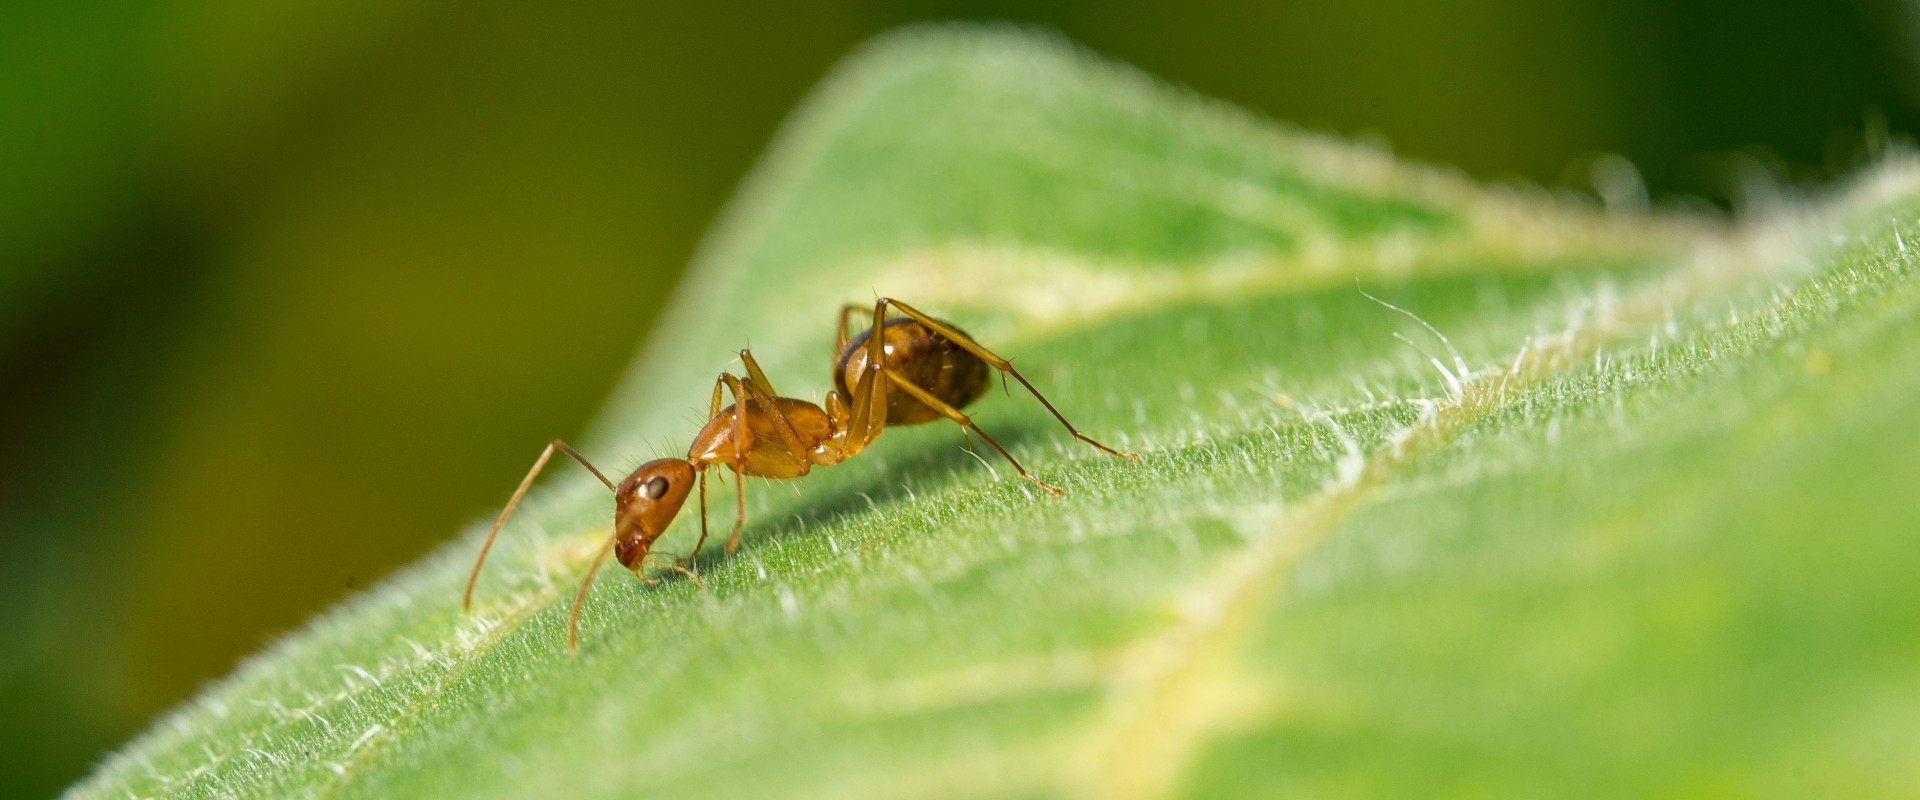 From Pest Problem To Property Perfection: The Impact Of Ant Exterminators On Home Appraisal In Calgary